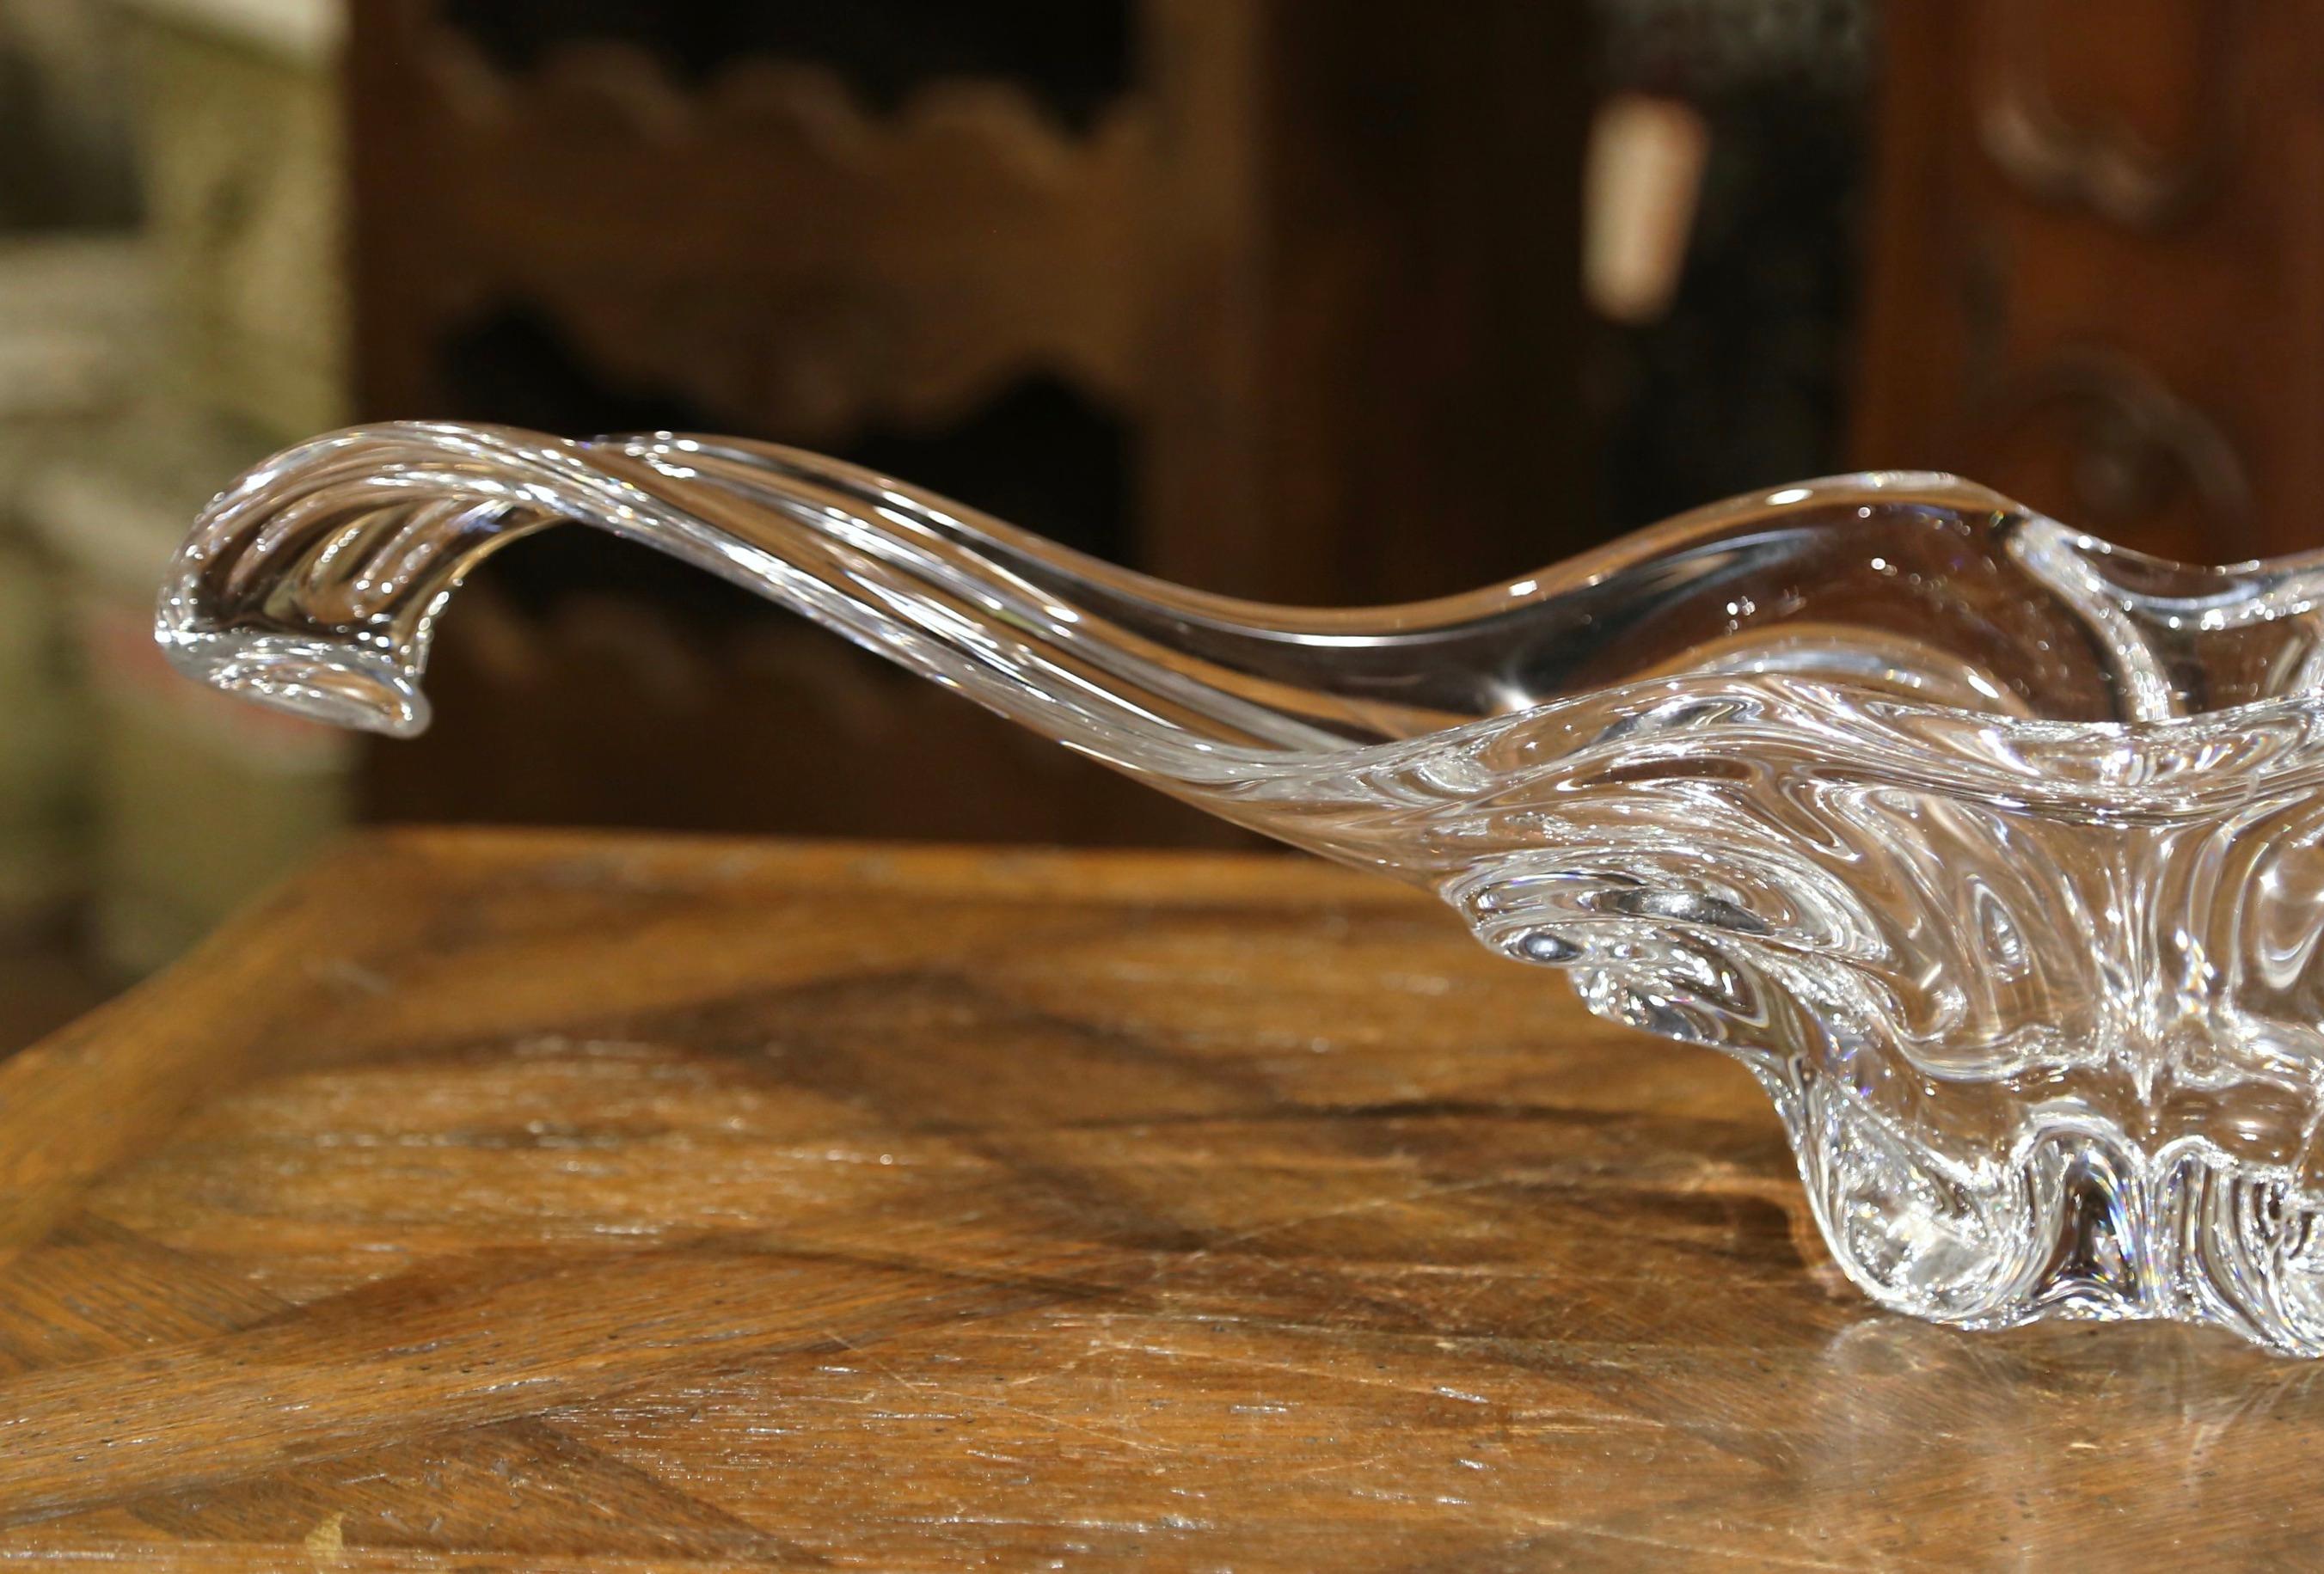 Art Deco Midcentury French Pulled Feathered Blown Clear Glass Center Vase For Sale